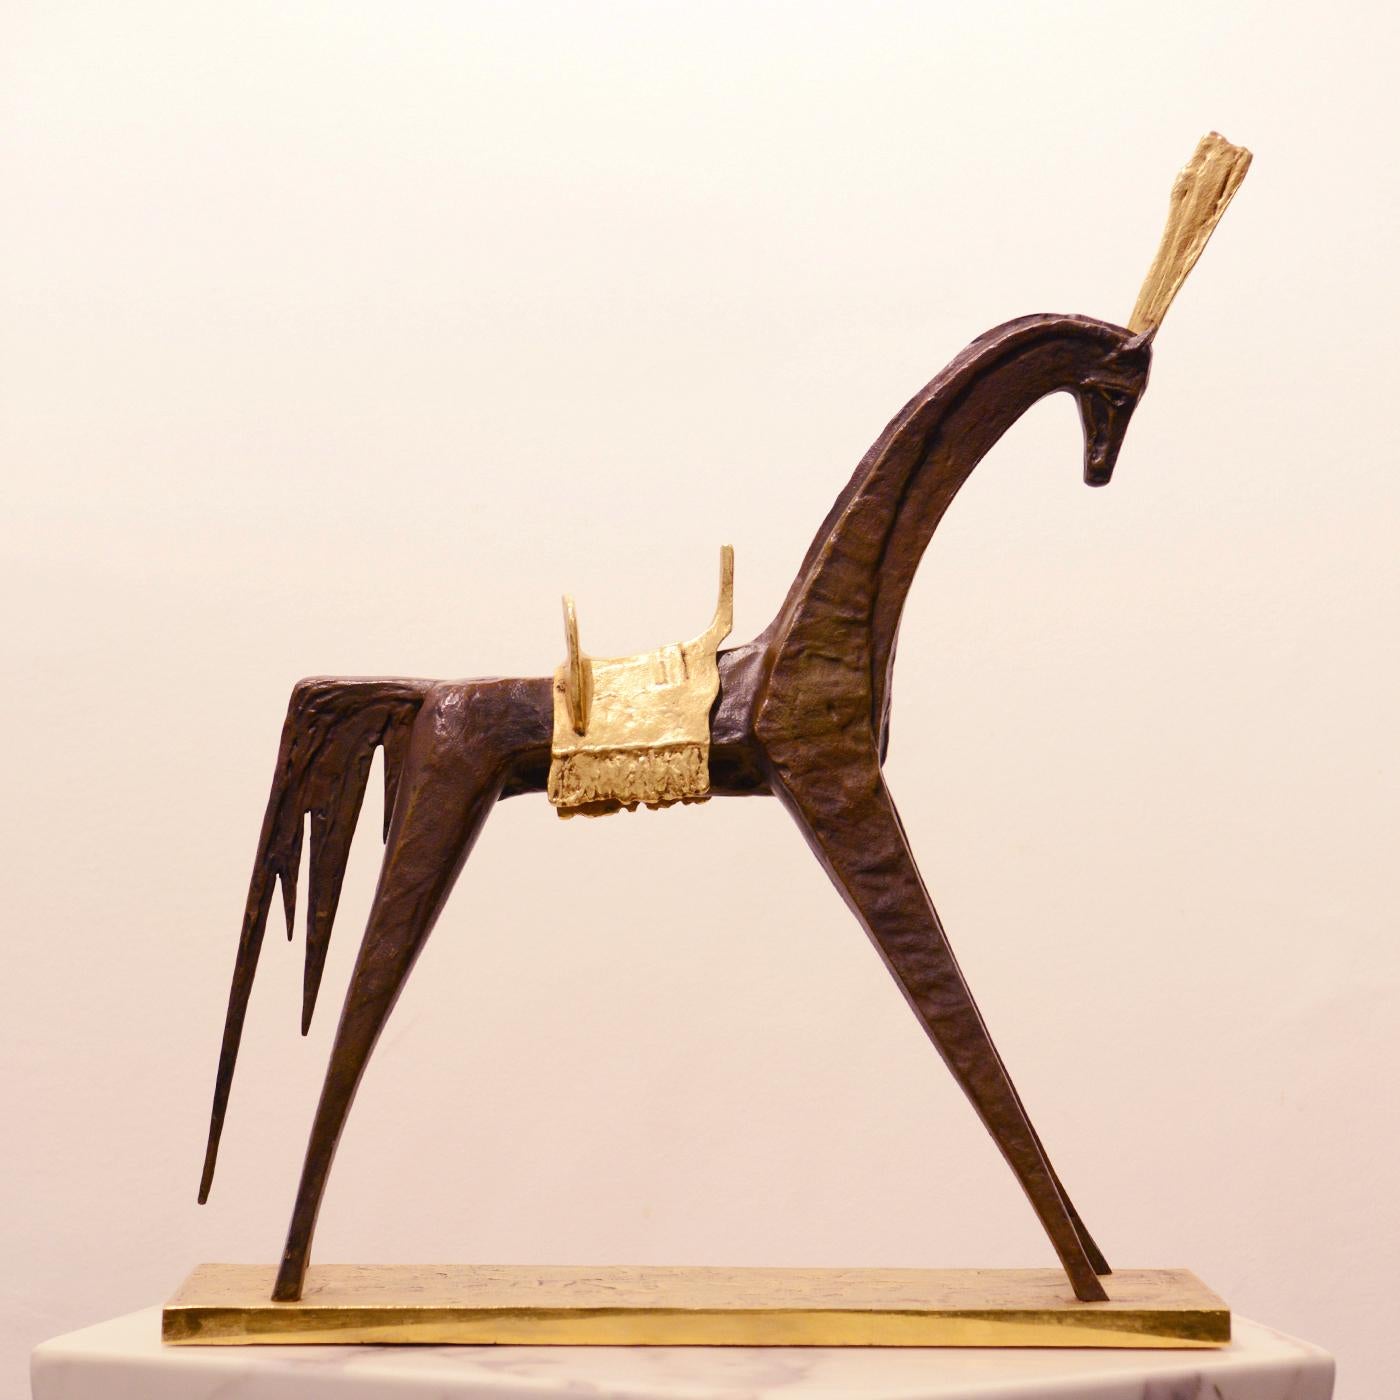 Sculpture Ispahan bronze horse by Felix Agostini.
All in hand-crafted bronze, with polished bronze
amovible saddle. Mane and base in polished bronze.
Signed piece by Felix Agostini, each piece is unique.